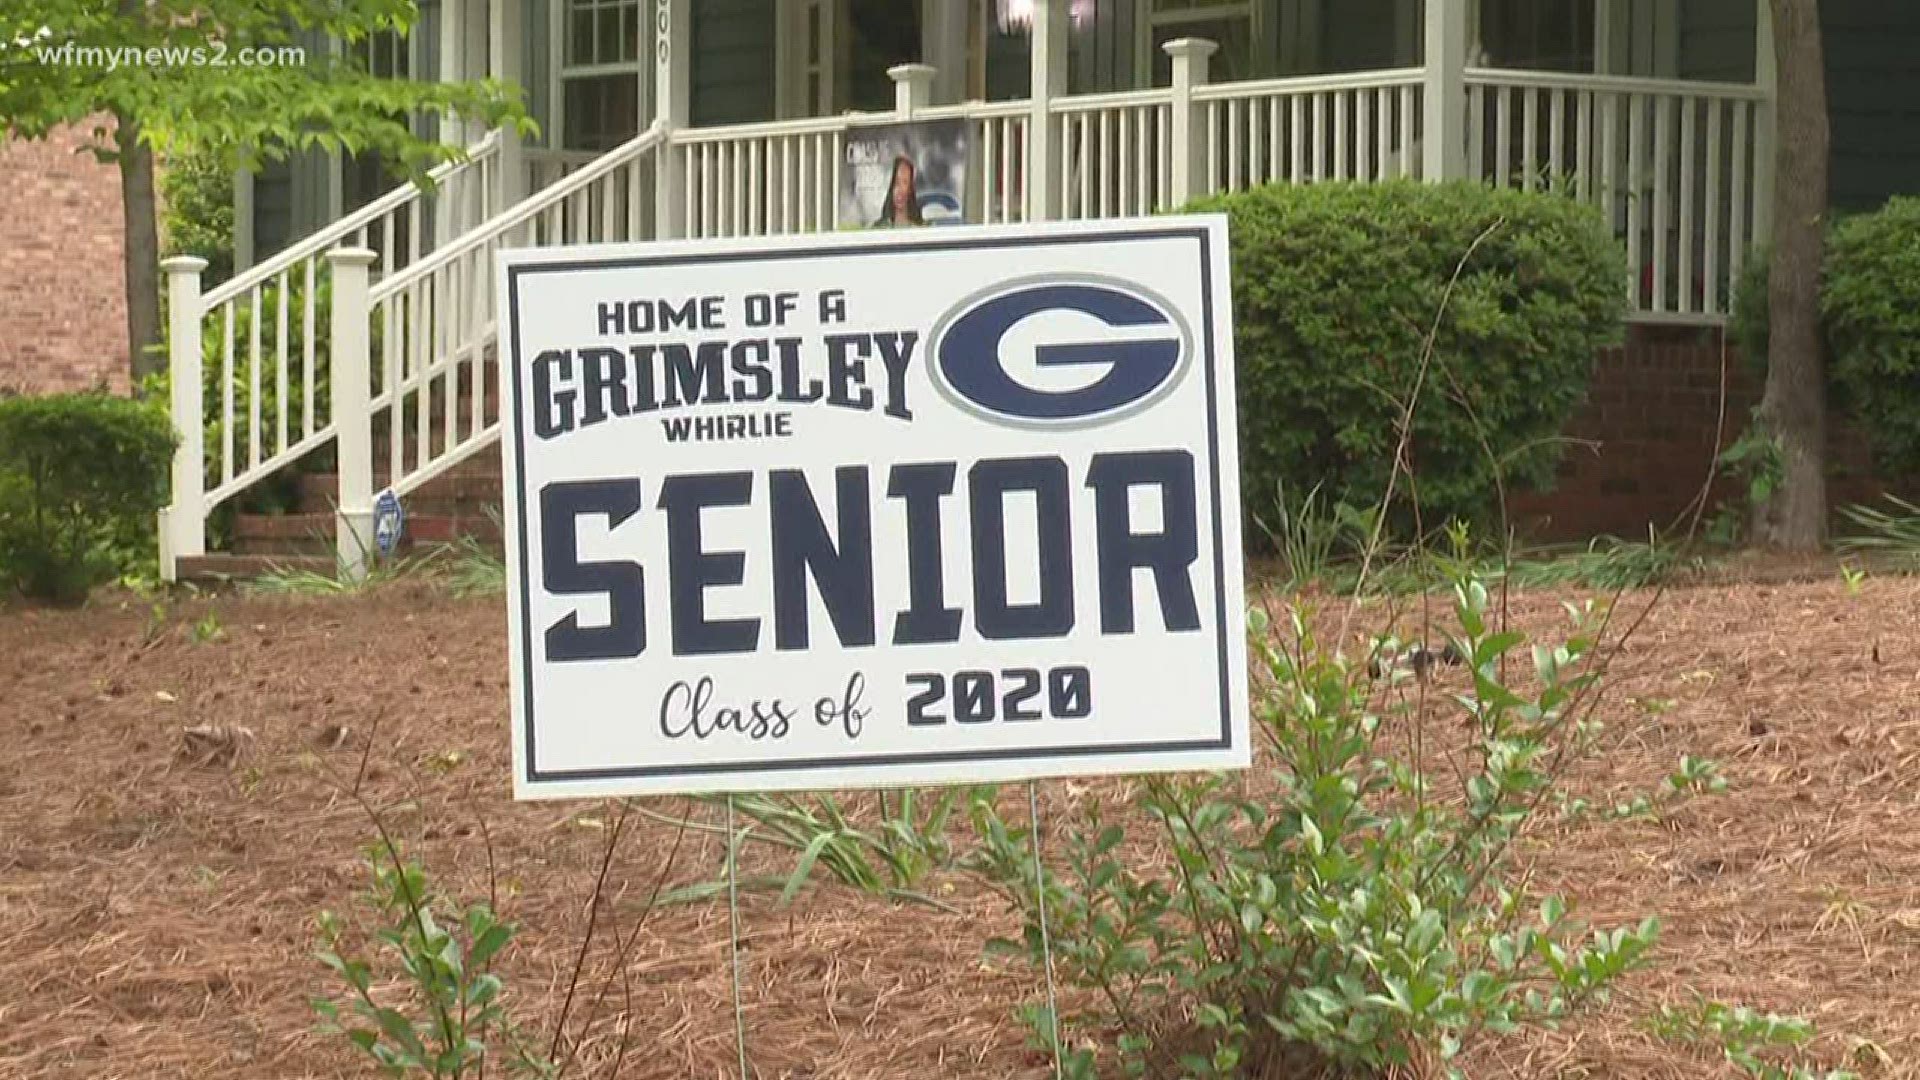 To make graduates feel special, a Grimsley High School parent set up a Facebook page for community members to “adopt” a senior and get them a $25 or less gift.